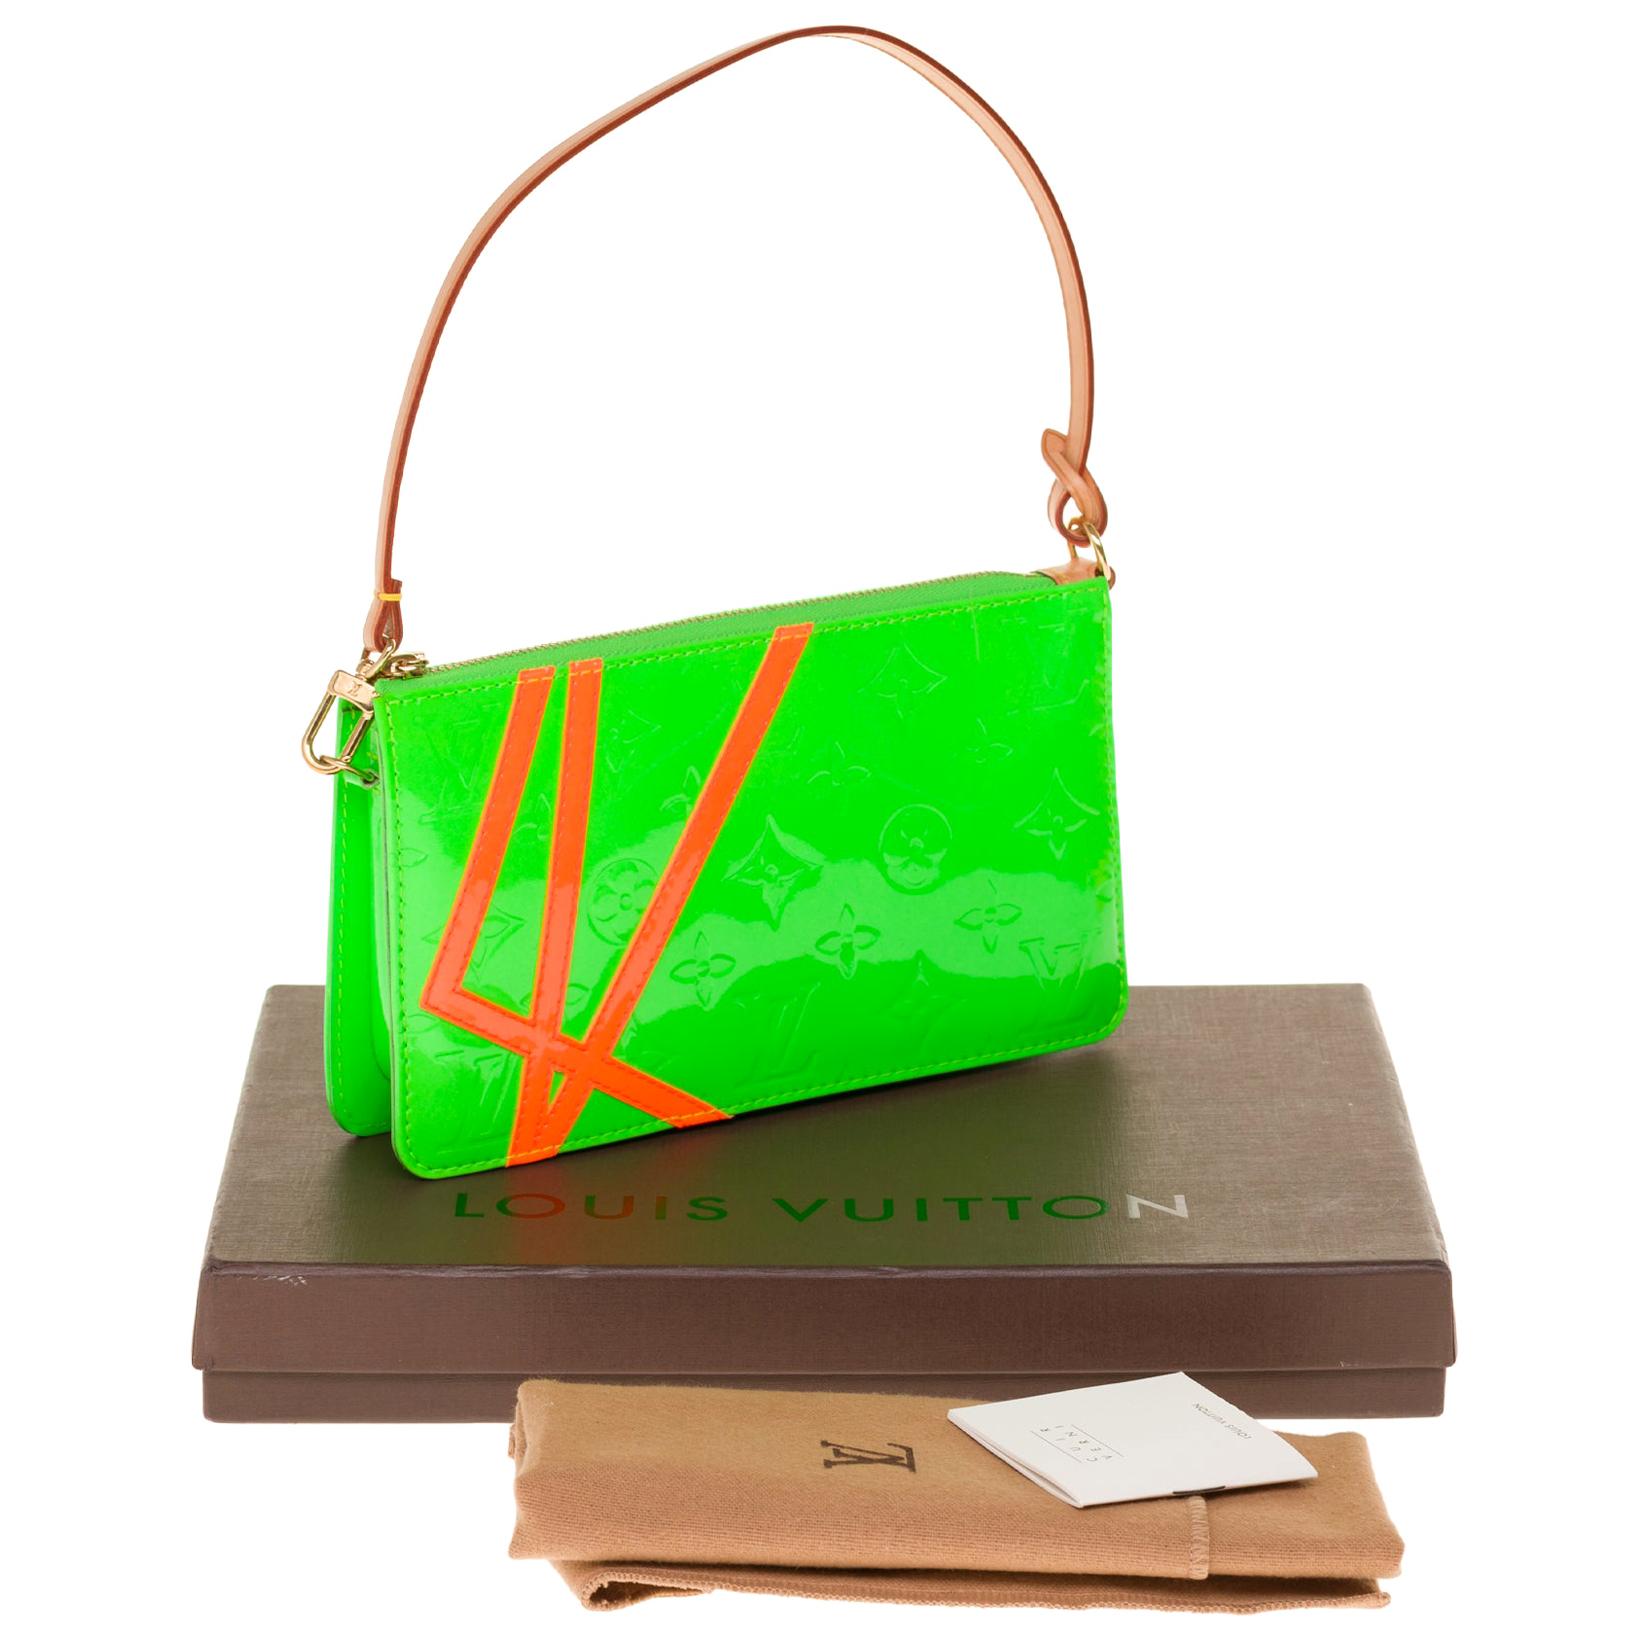 Brand New Louis Vuitton Lexington limited edition Pouch in green